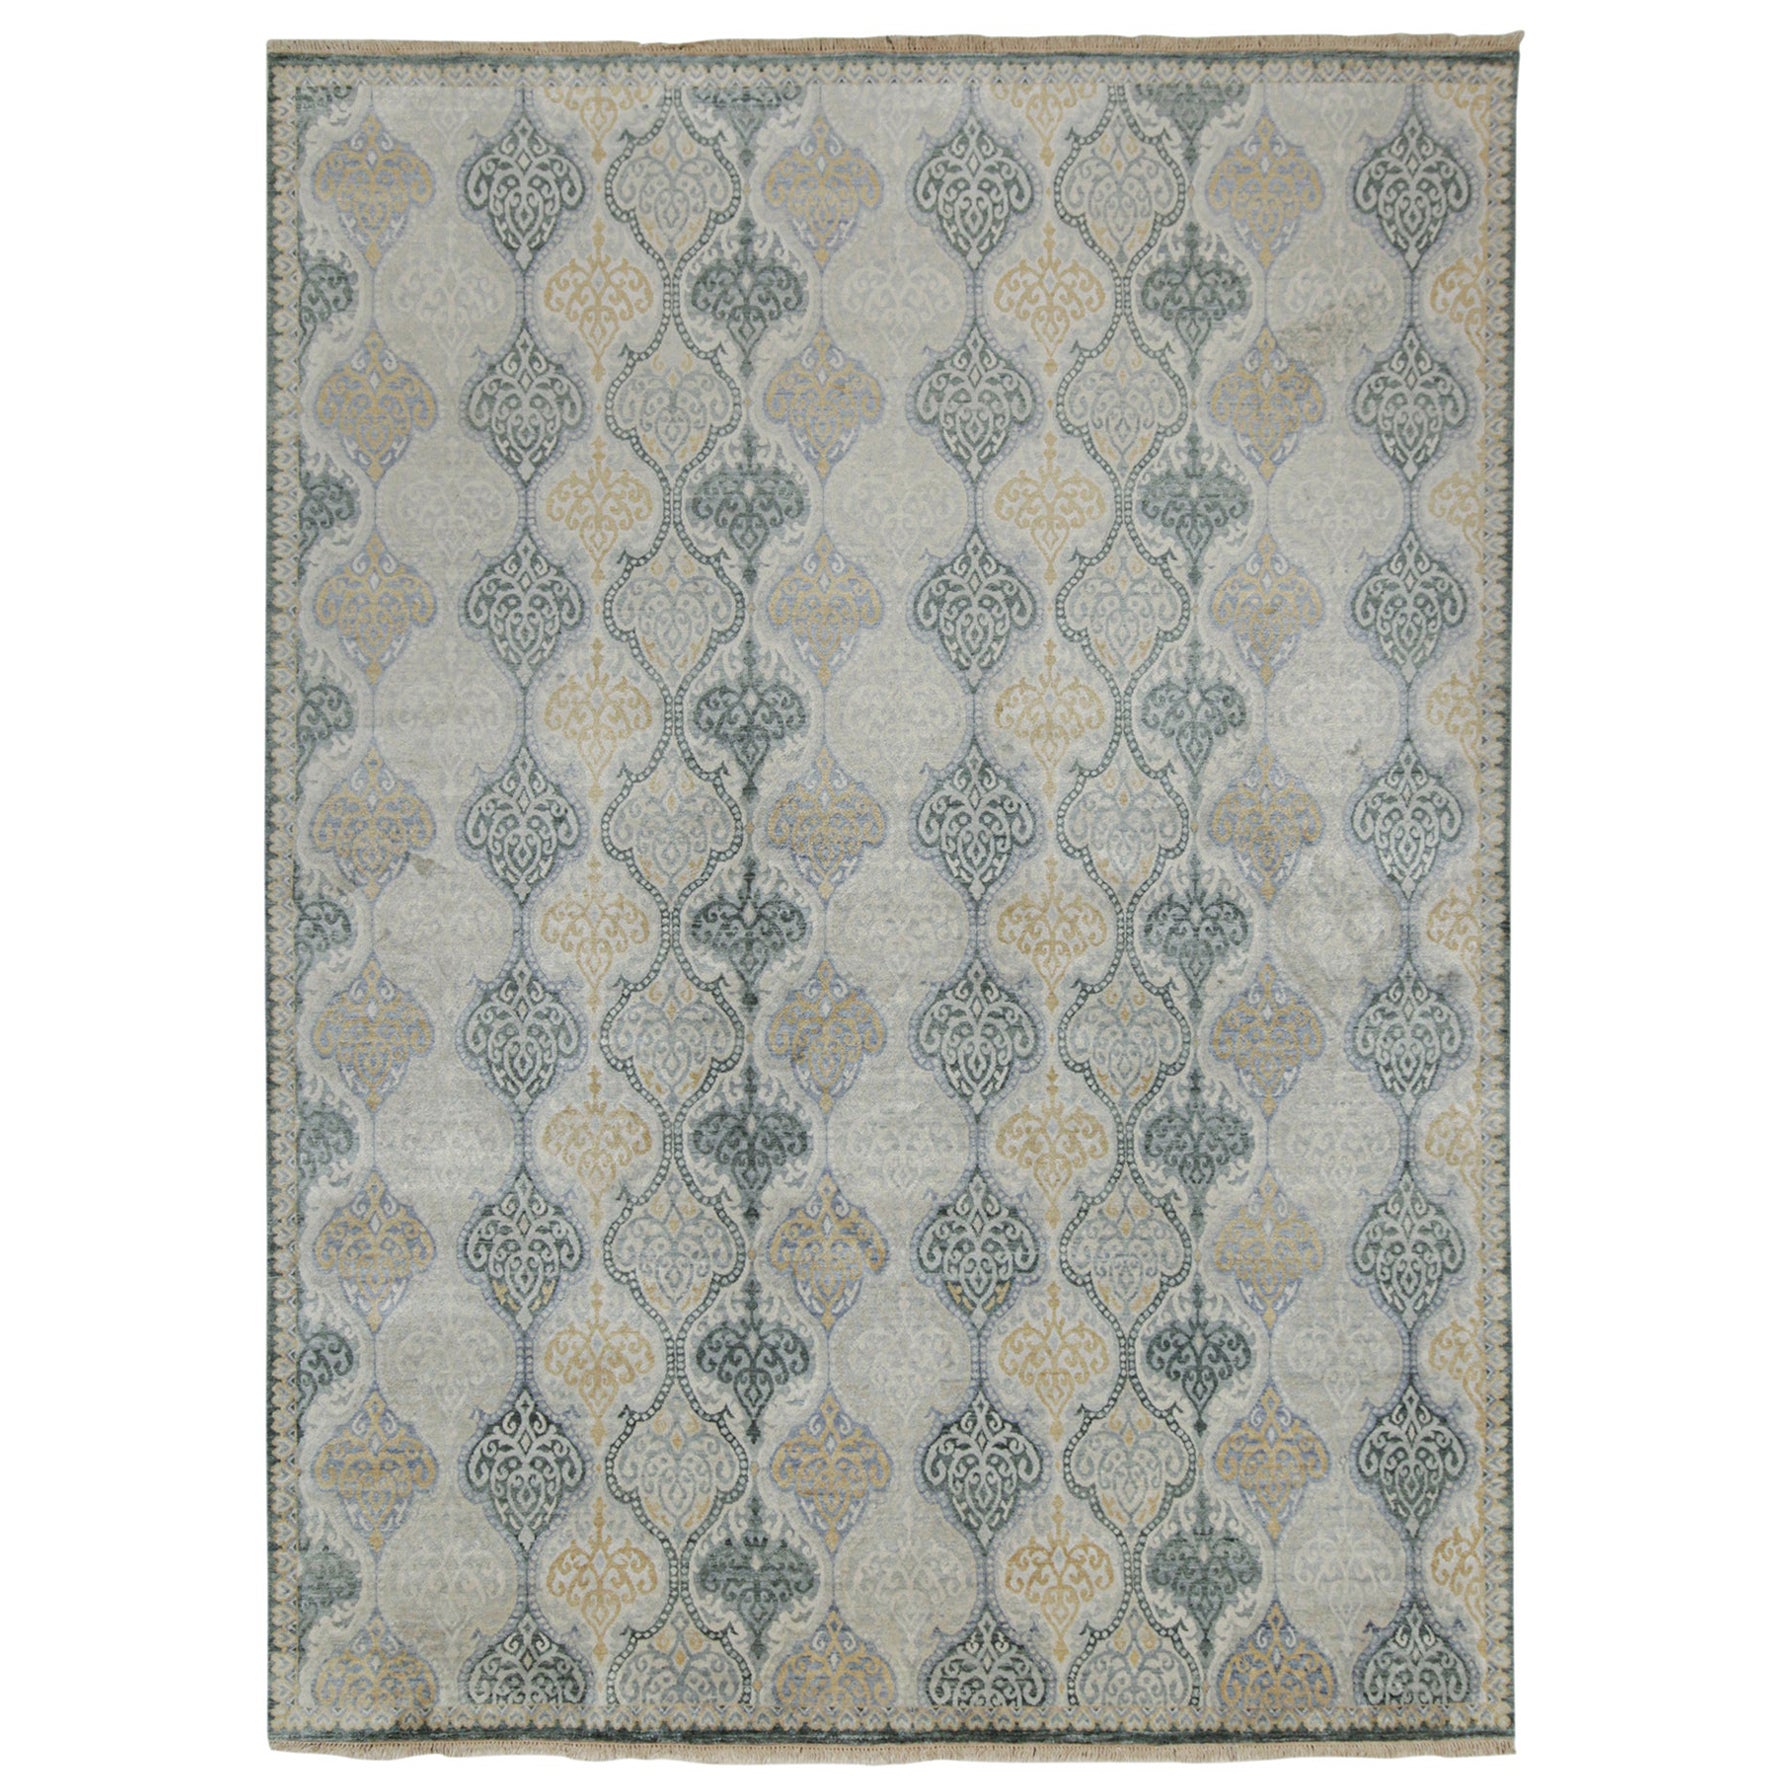 Rug & Kilim’s Classic Style Rug with Gray, Beige and Gold Pattern